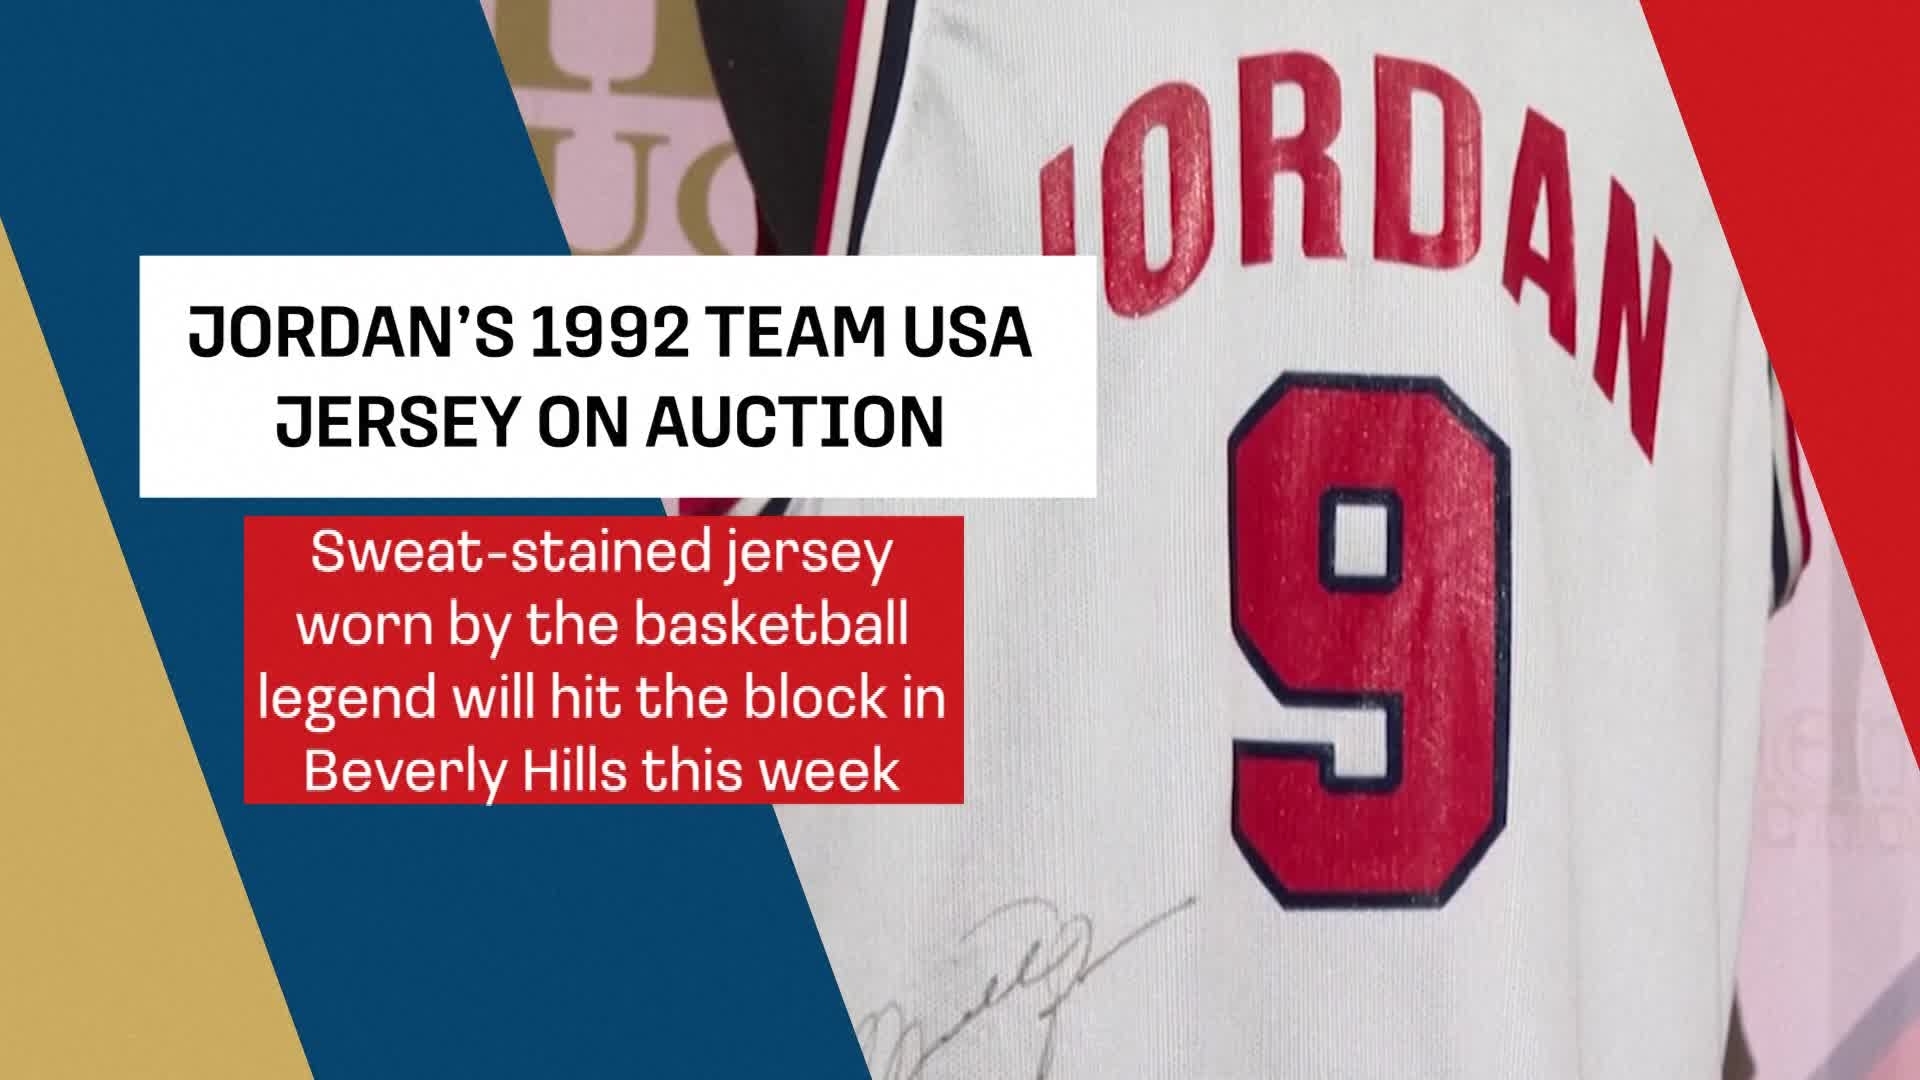 Game-Used Balls, Jerseys, Warmups from 2022 NBA All-Star Weekend at Auction